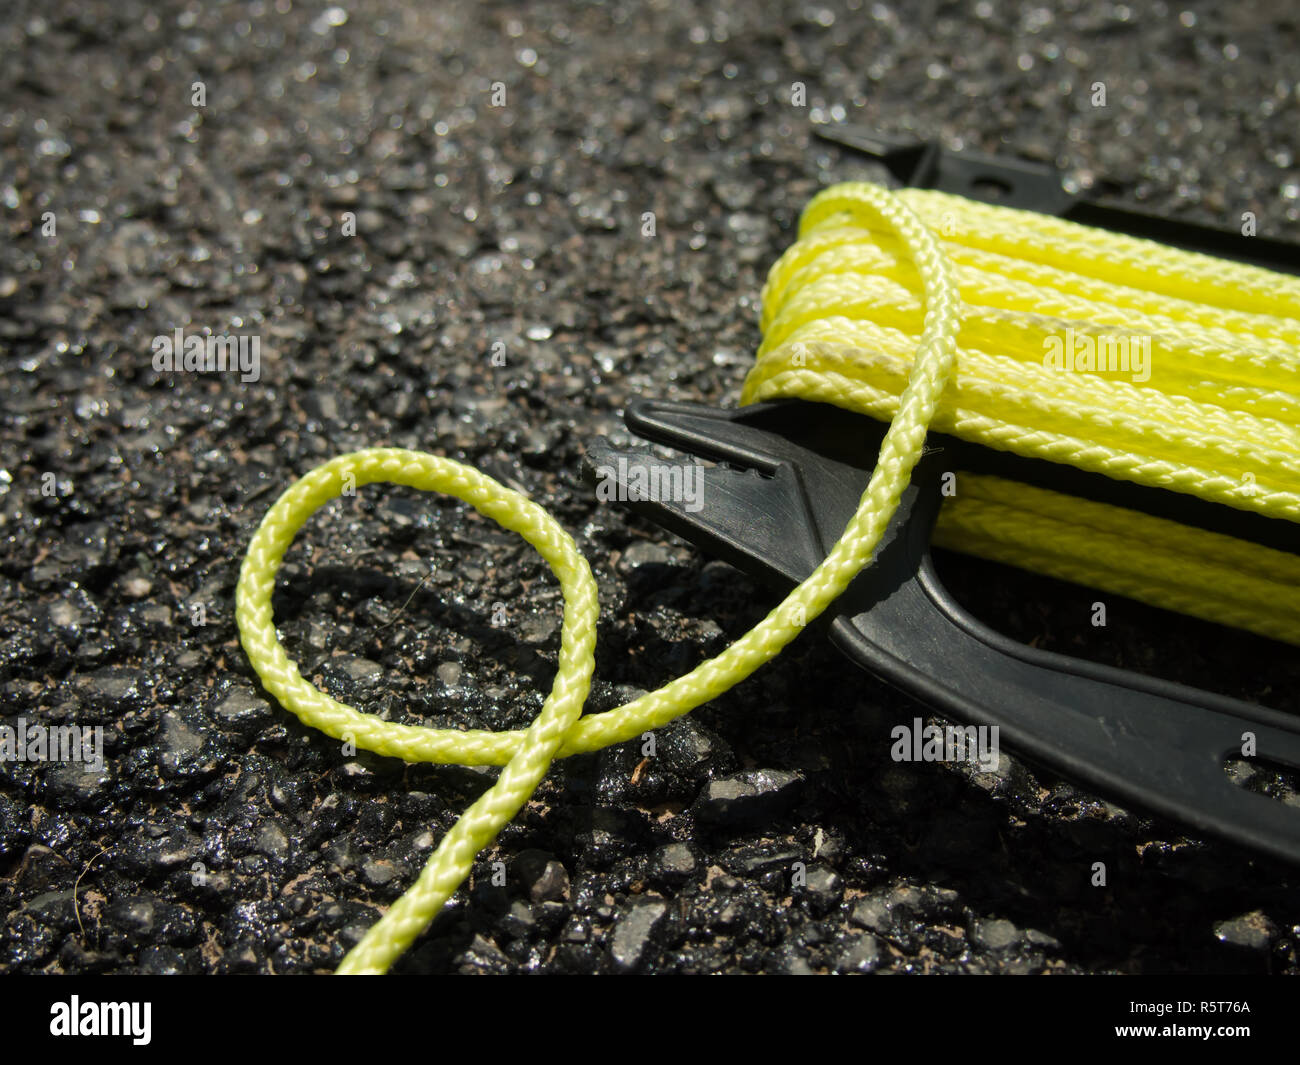 The Yellow String on the Ground at the Construction Site Stock Photo - Alamy